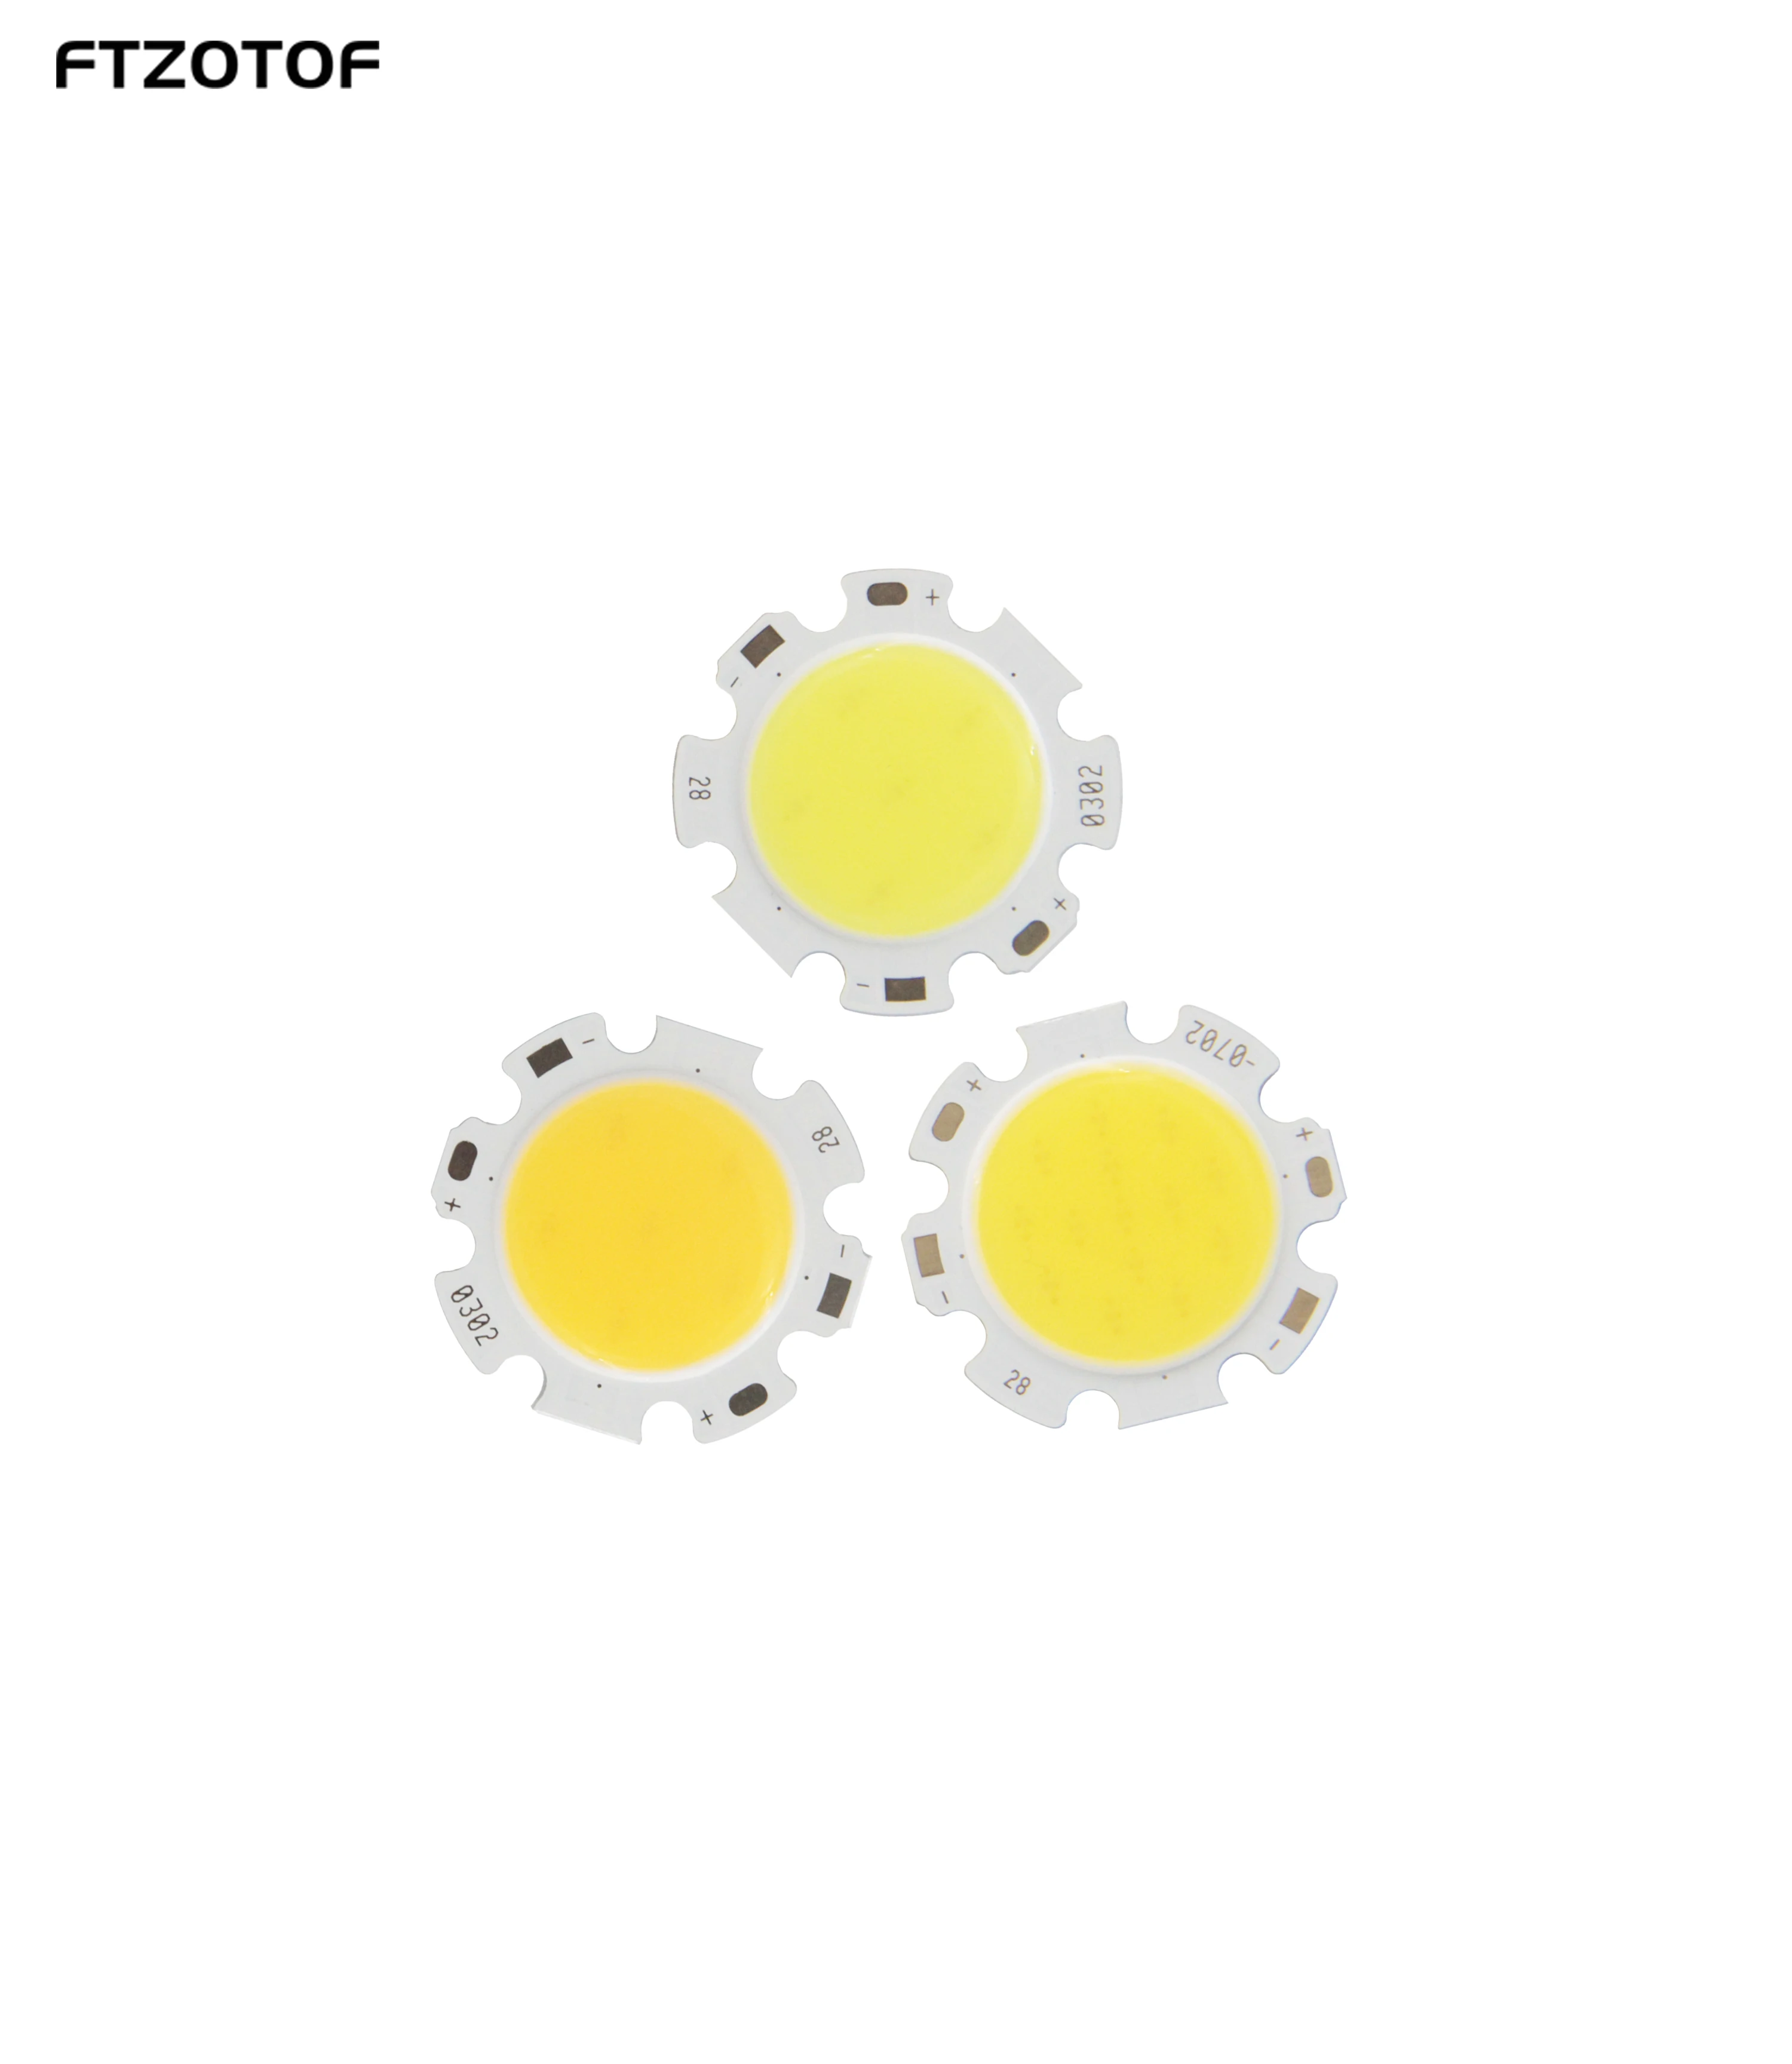 

10PCS Ultra Bright Light Source Bulb 7W DC 21-24V Chip COB Warm Cold White LED 700LM for Spotlights Downlight Ceiling Lamps 28MM